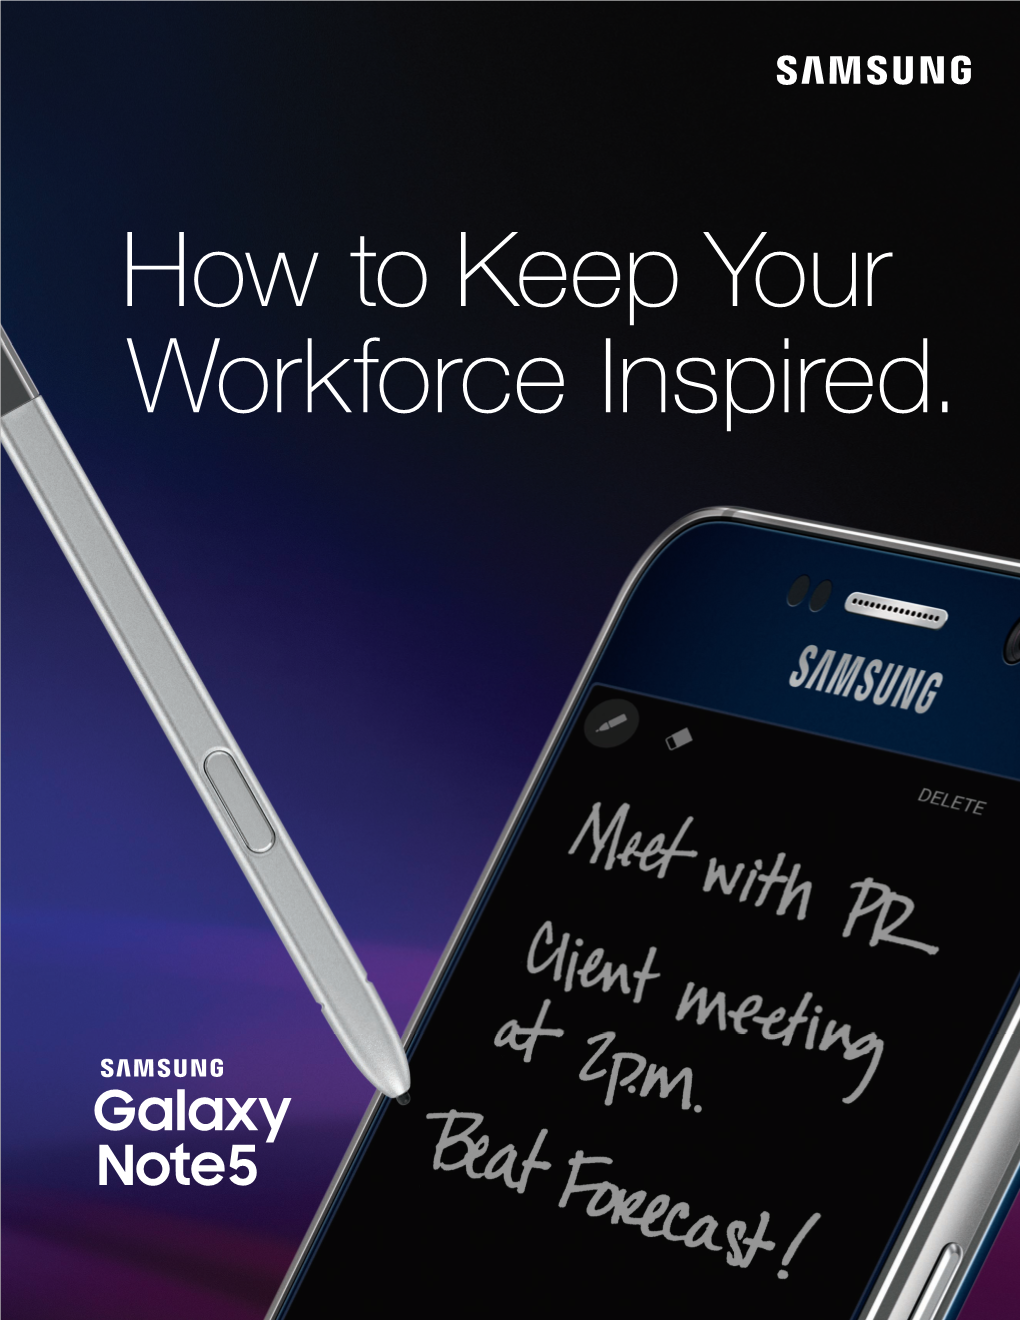 How to Keep Your Workforce Inspired. Samsung Galaxy Note5 Puts Power Into the Hands of Your Business